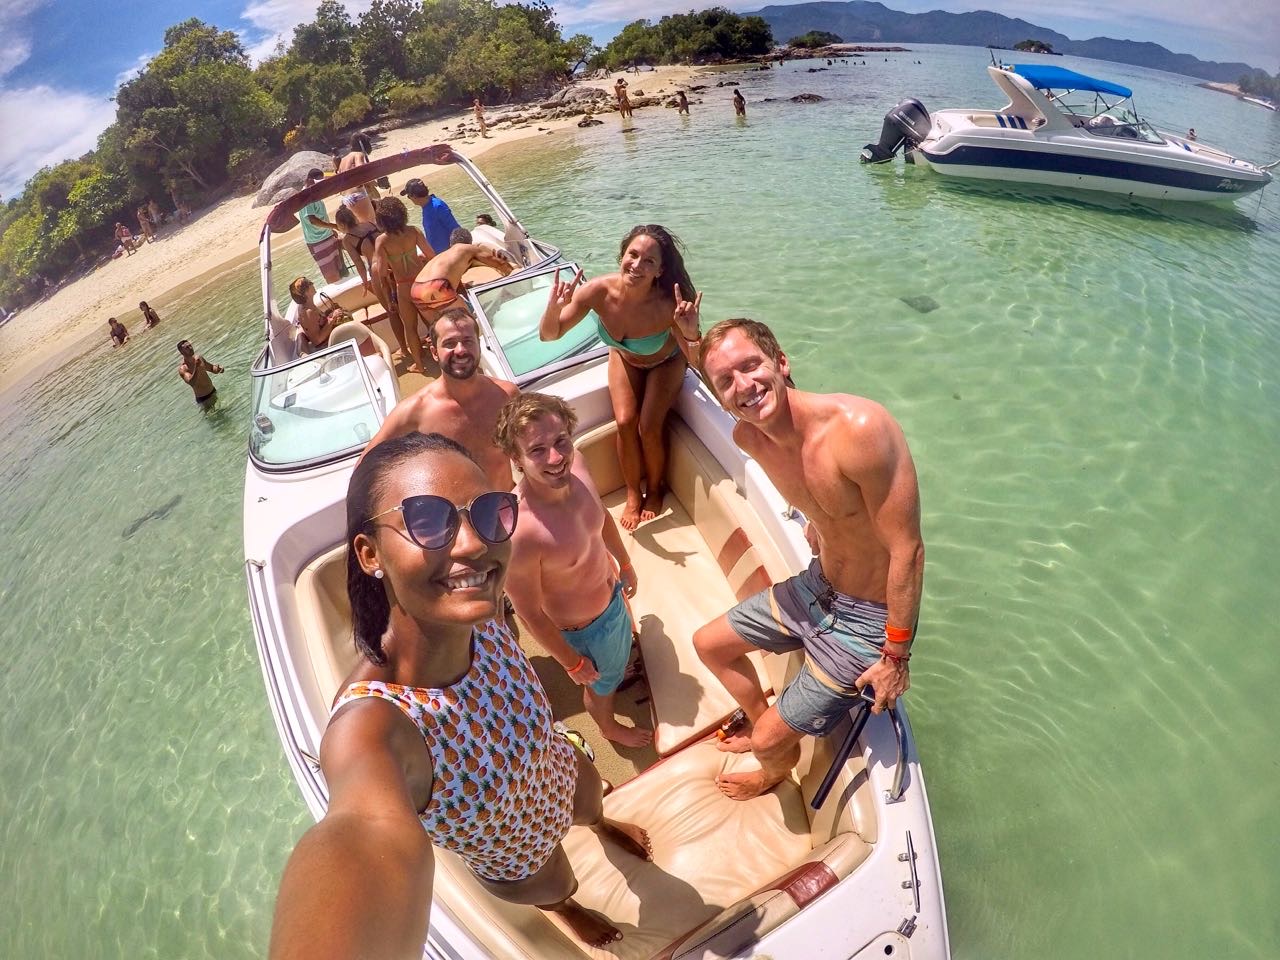 David Simpson and friends near the beach at speedboat tour in Ilha Grande, Brazil. Ilha Grande cures the hangover from hell